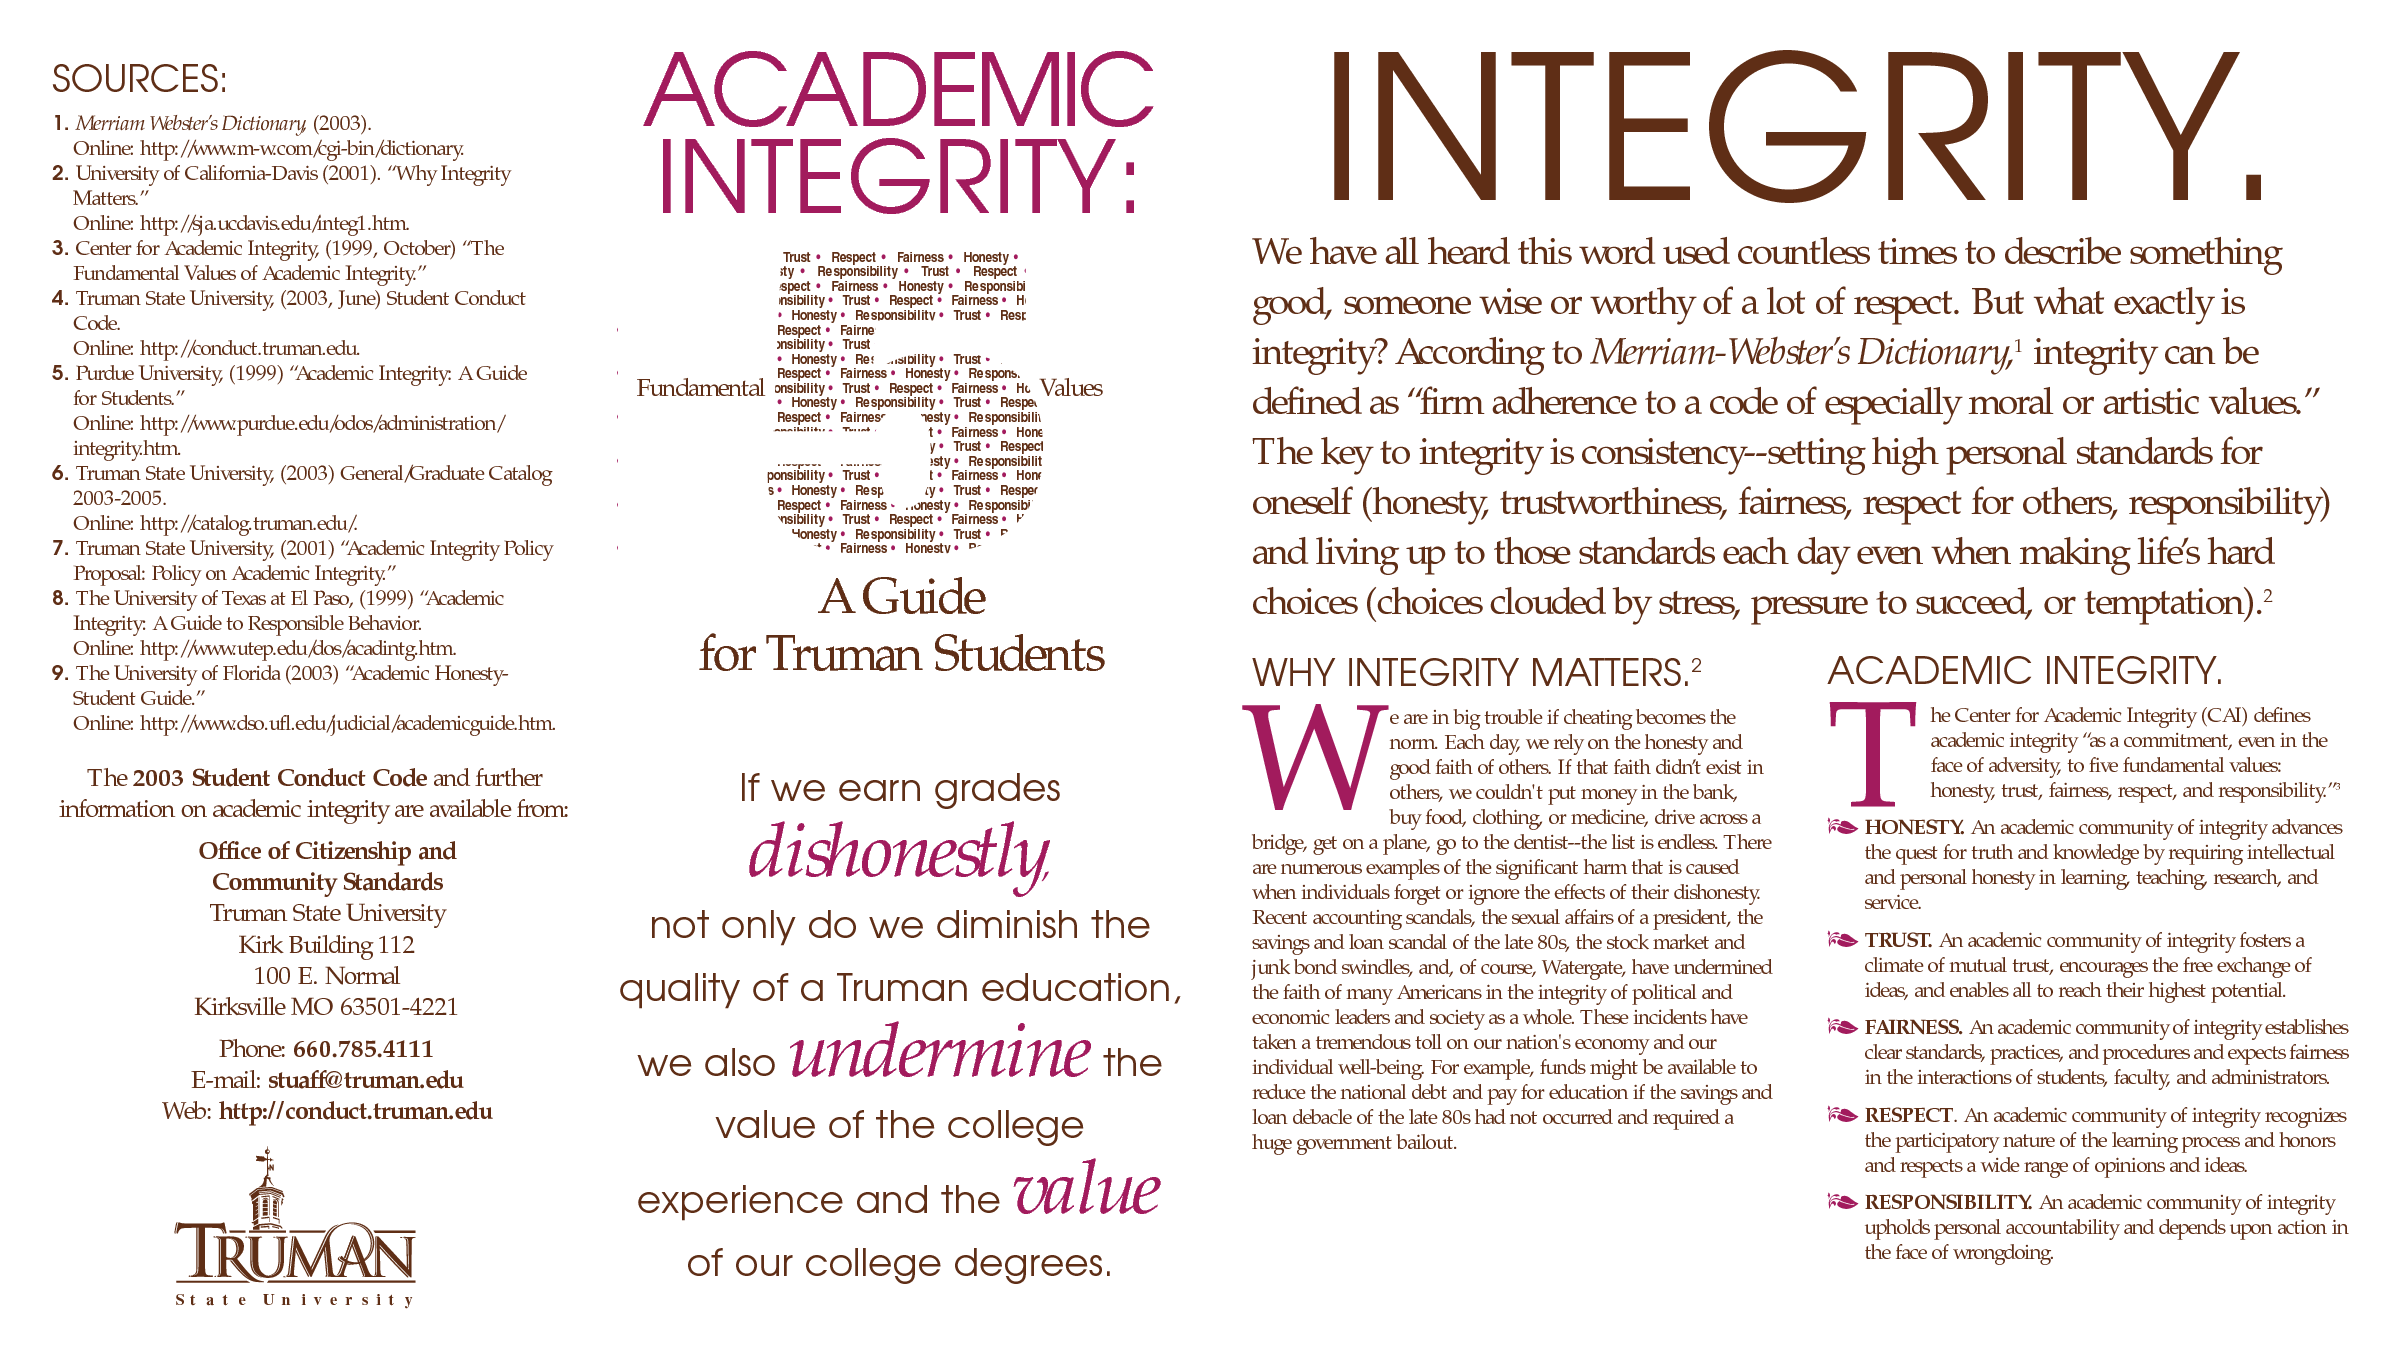 Key integrity. Integrity перевод. - Integrity and honesty.. Fundamental values of Academic Integrity according to the International Centre of Academic Integrity. Is firm adherence to a code of especially moral or artistic values.